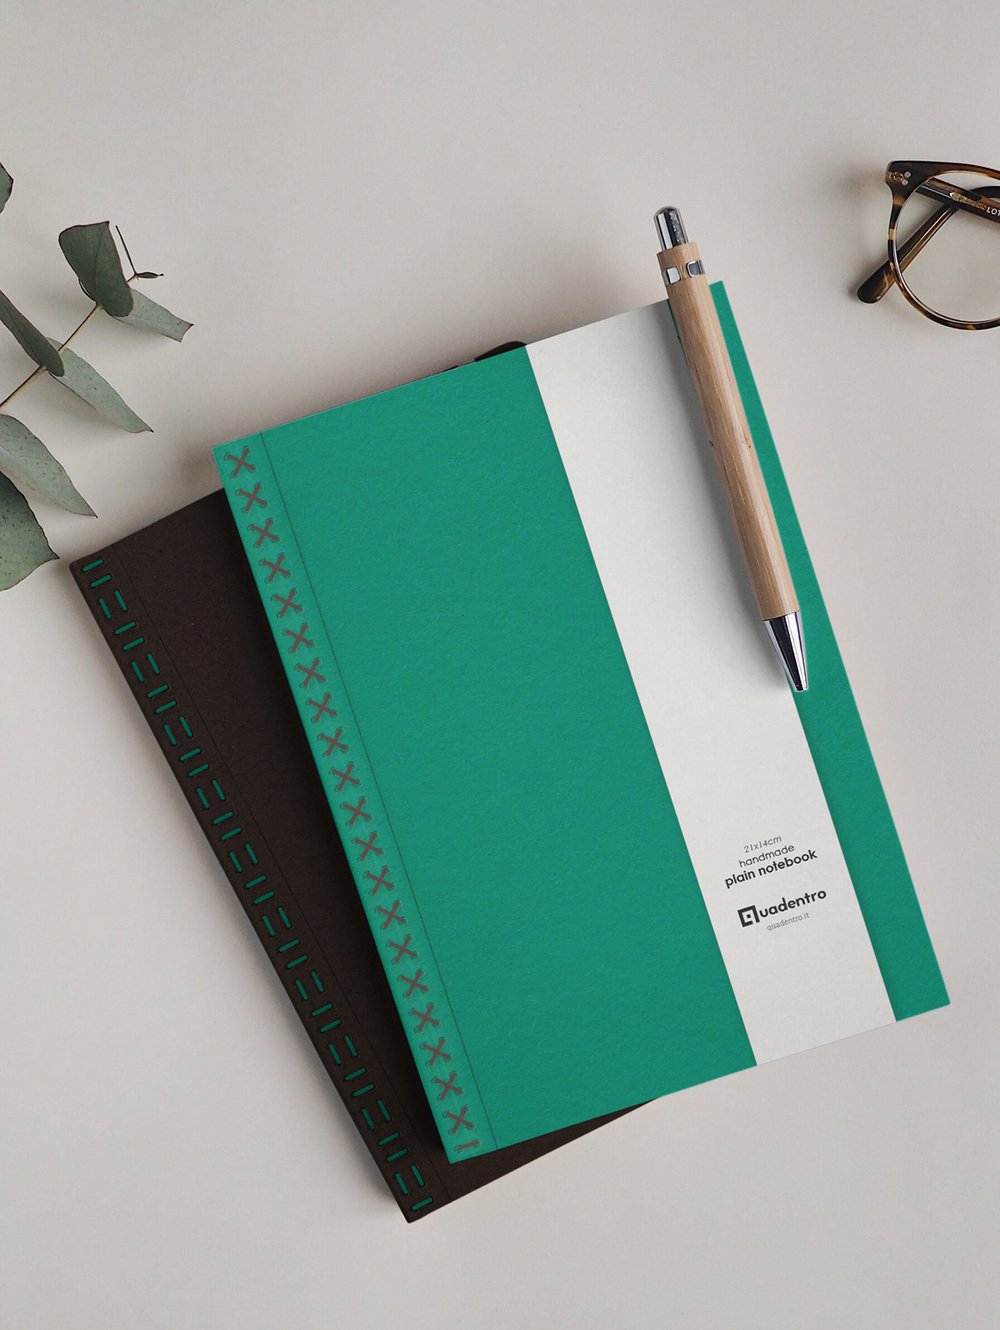 Quadentro” notebook in A5 format with green cover. — Milan Icons